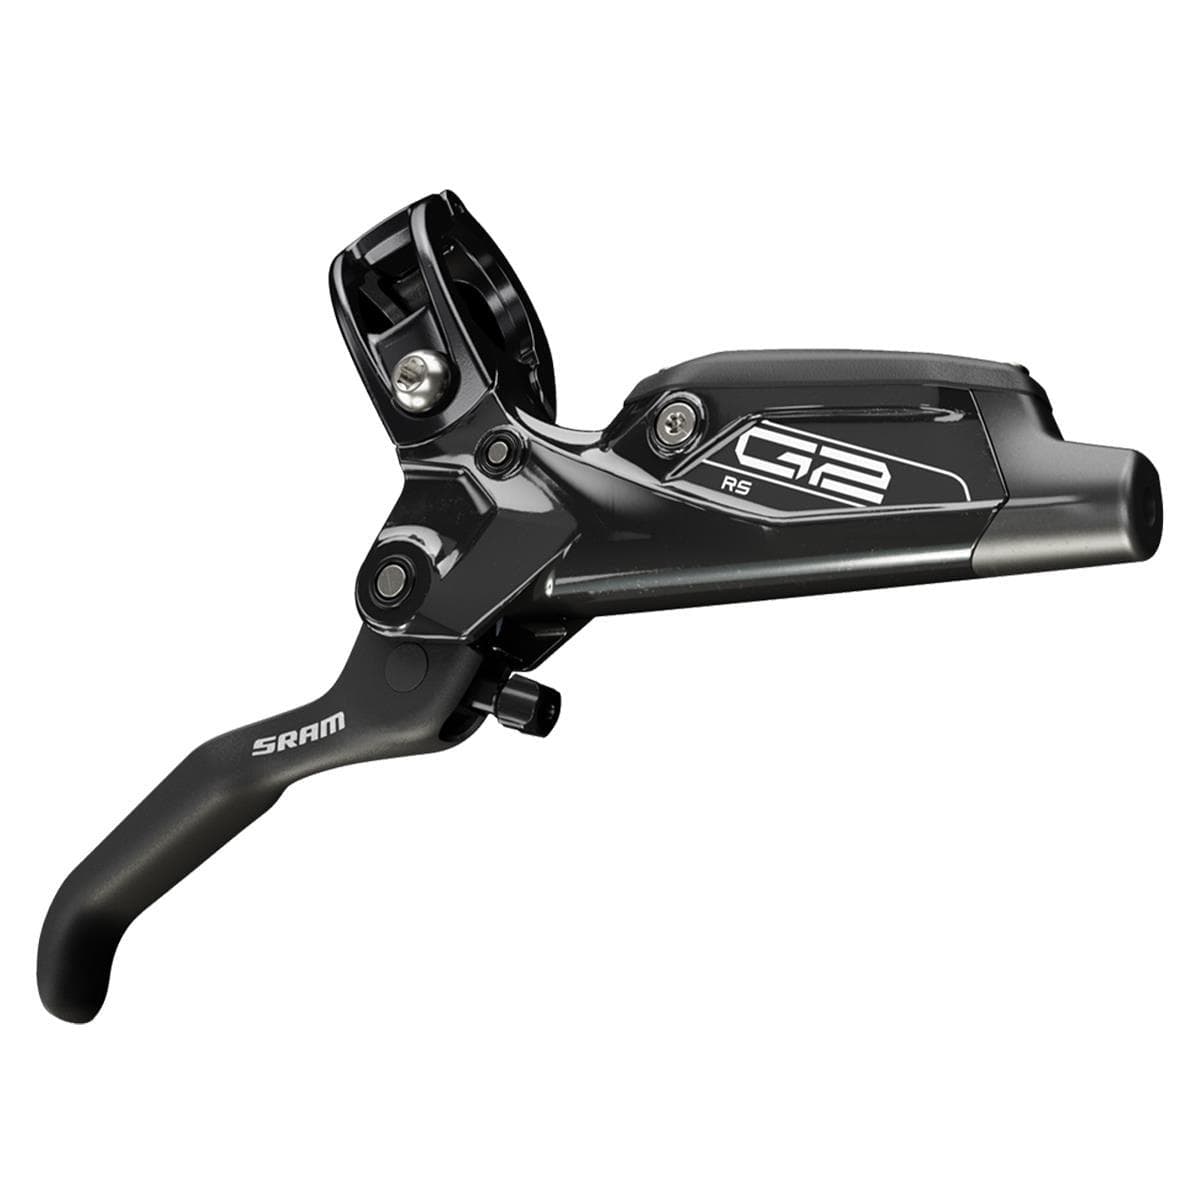 Sram Disc Brake G2 Rs (Reach, Swinglink) Aluminum Lever Front 950Mm Hose (Rotor/Bracket Sold Separately)A1: Gloss Black Front